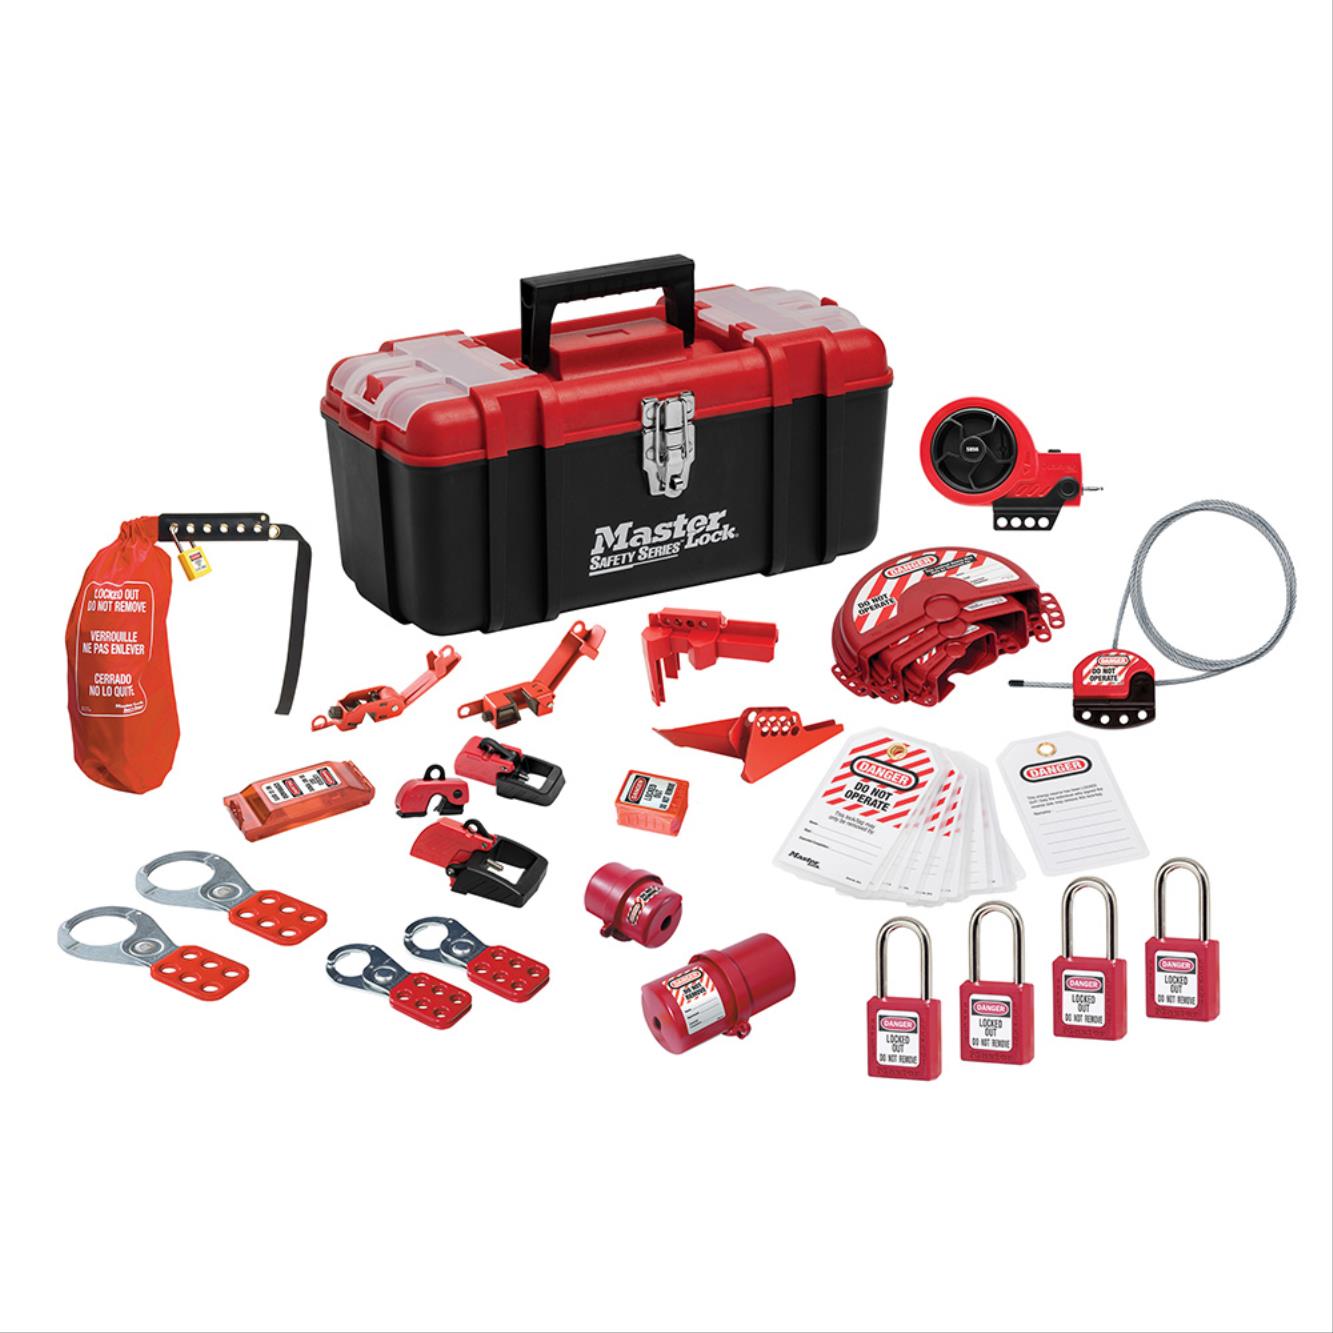 Premier Valve and Electrical Lockout Kit with Plastic Locks